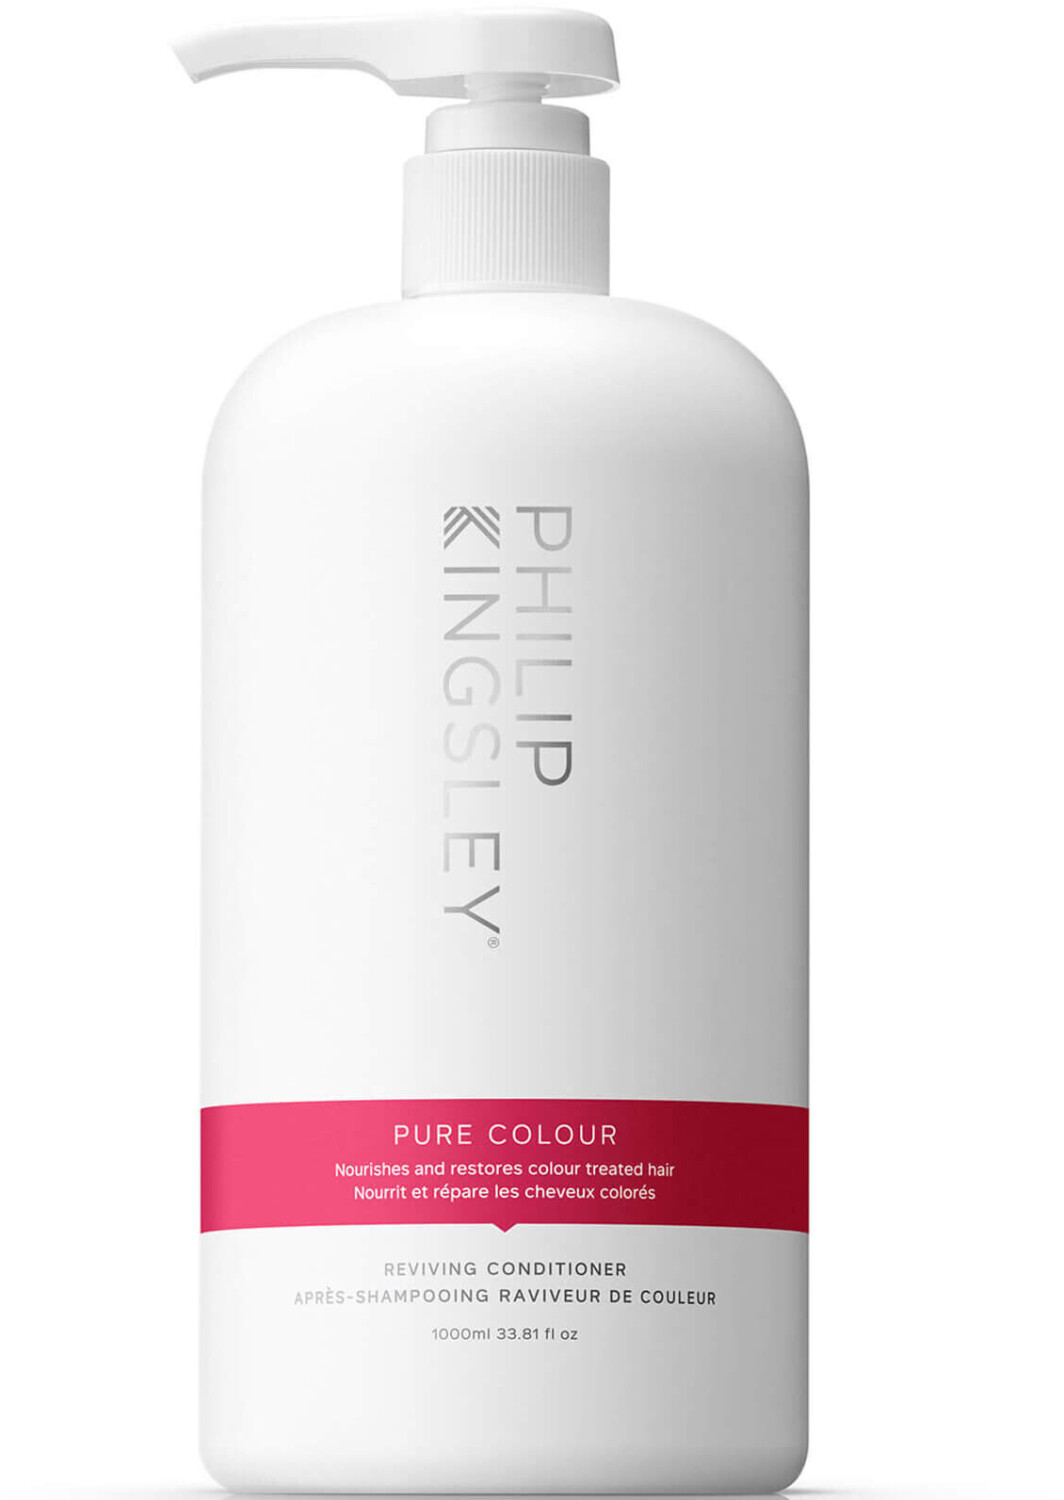 Photos - Hair Product Philip Kingsley Pure Color Reviving Conditioner  (1000ml)